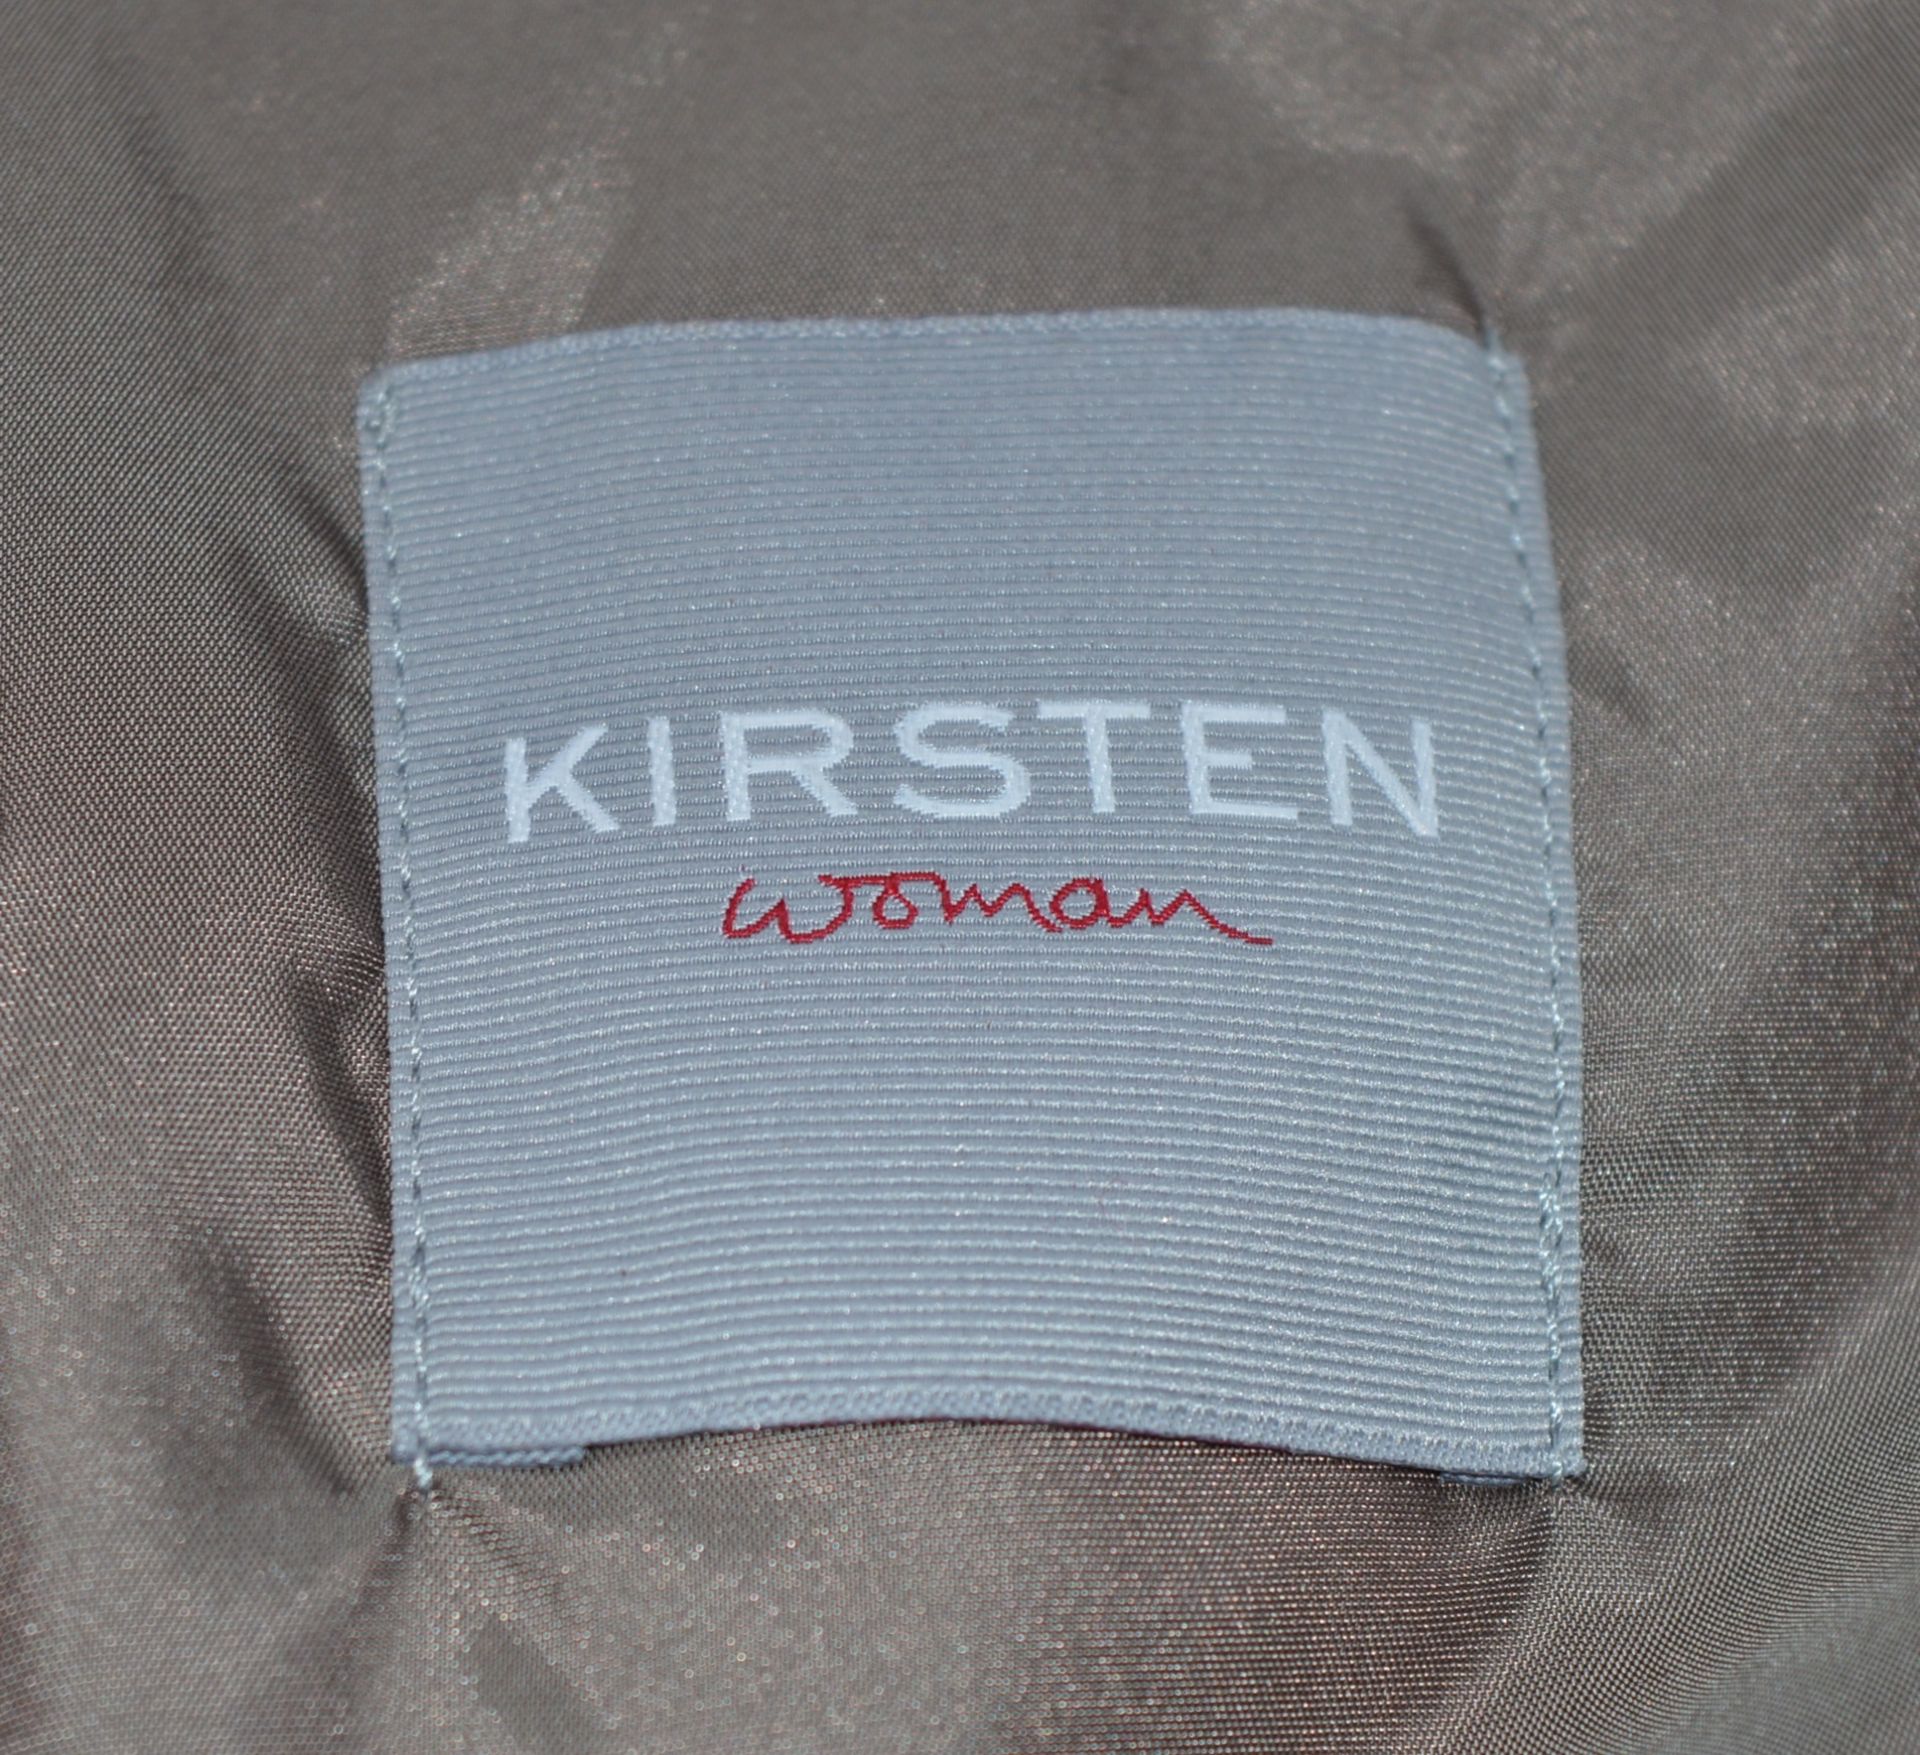 1 x Steilmann KSTN By Kirsten Womens Coat - Padded Coat With Functional Pockets, Inner Pocket and - Image 9 of 12